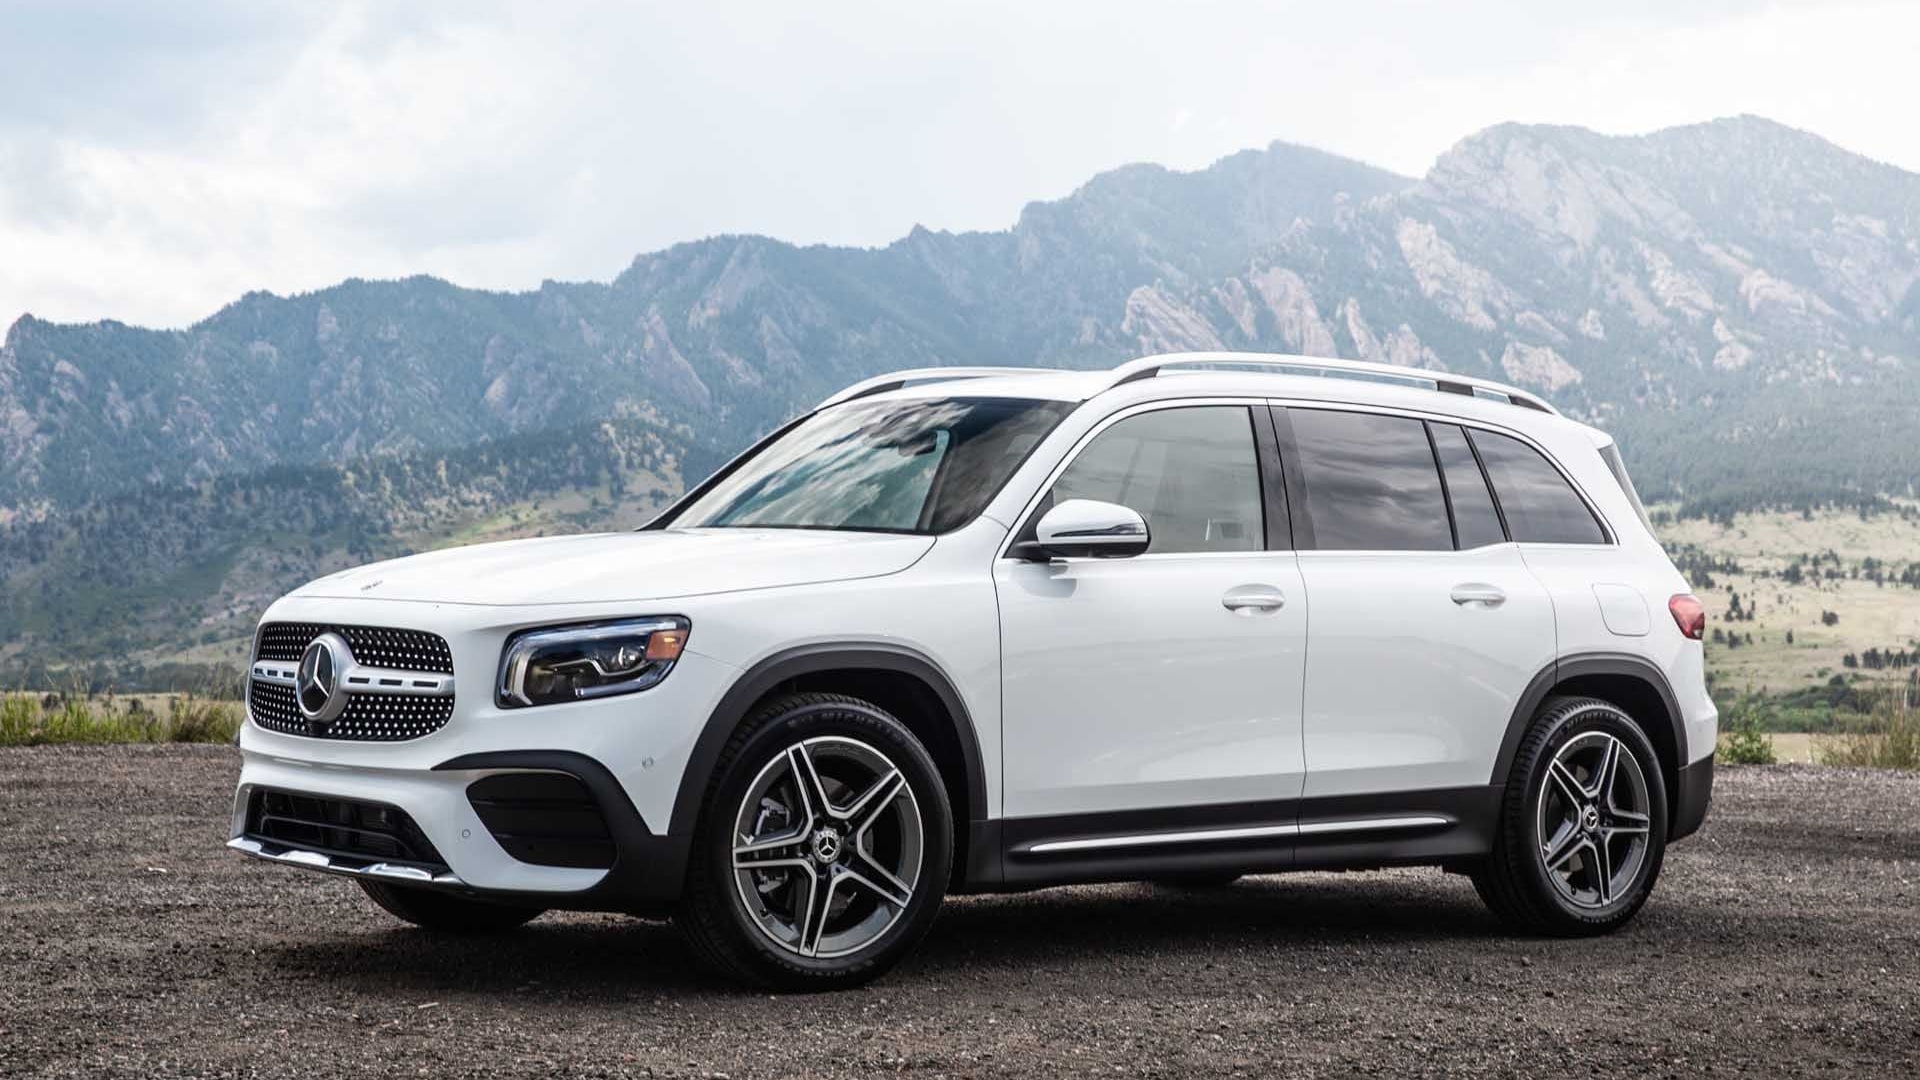 Review The 2020 Mercedes Benz Glb 250 Plays All The Right Angles Images, Photos, Reviews